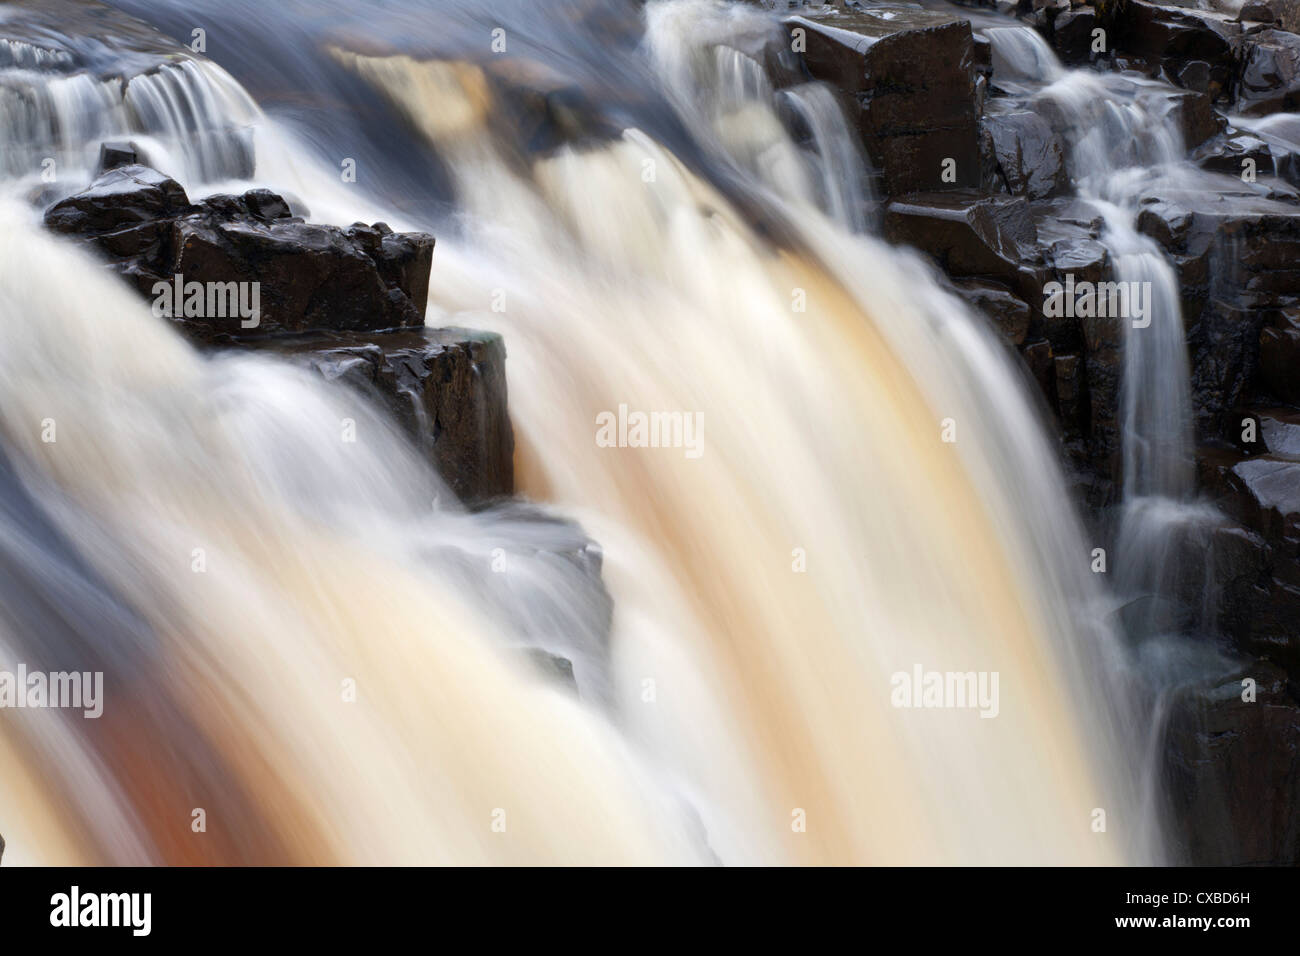 Low Force Waterfall in Upper Teesdale, County Durham, England, United Kingdom, Europe Stock Photo